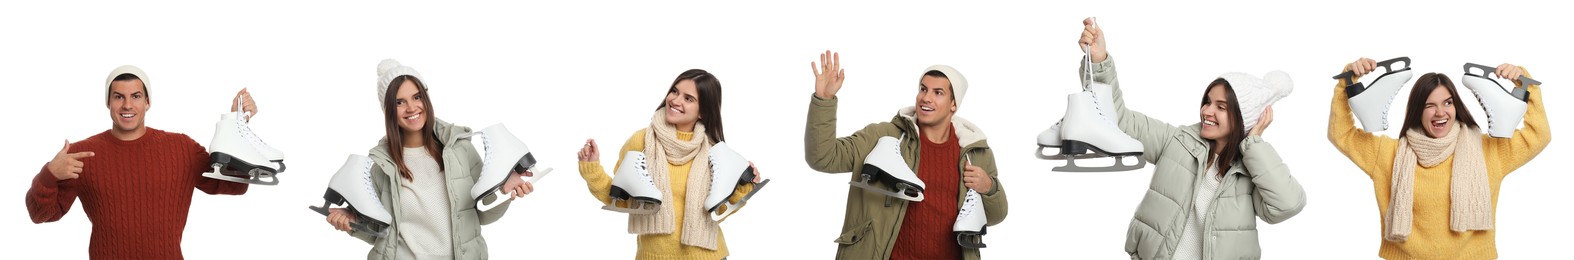 Image of Collage with photos of man and woman with ice skates on white background, banner design